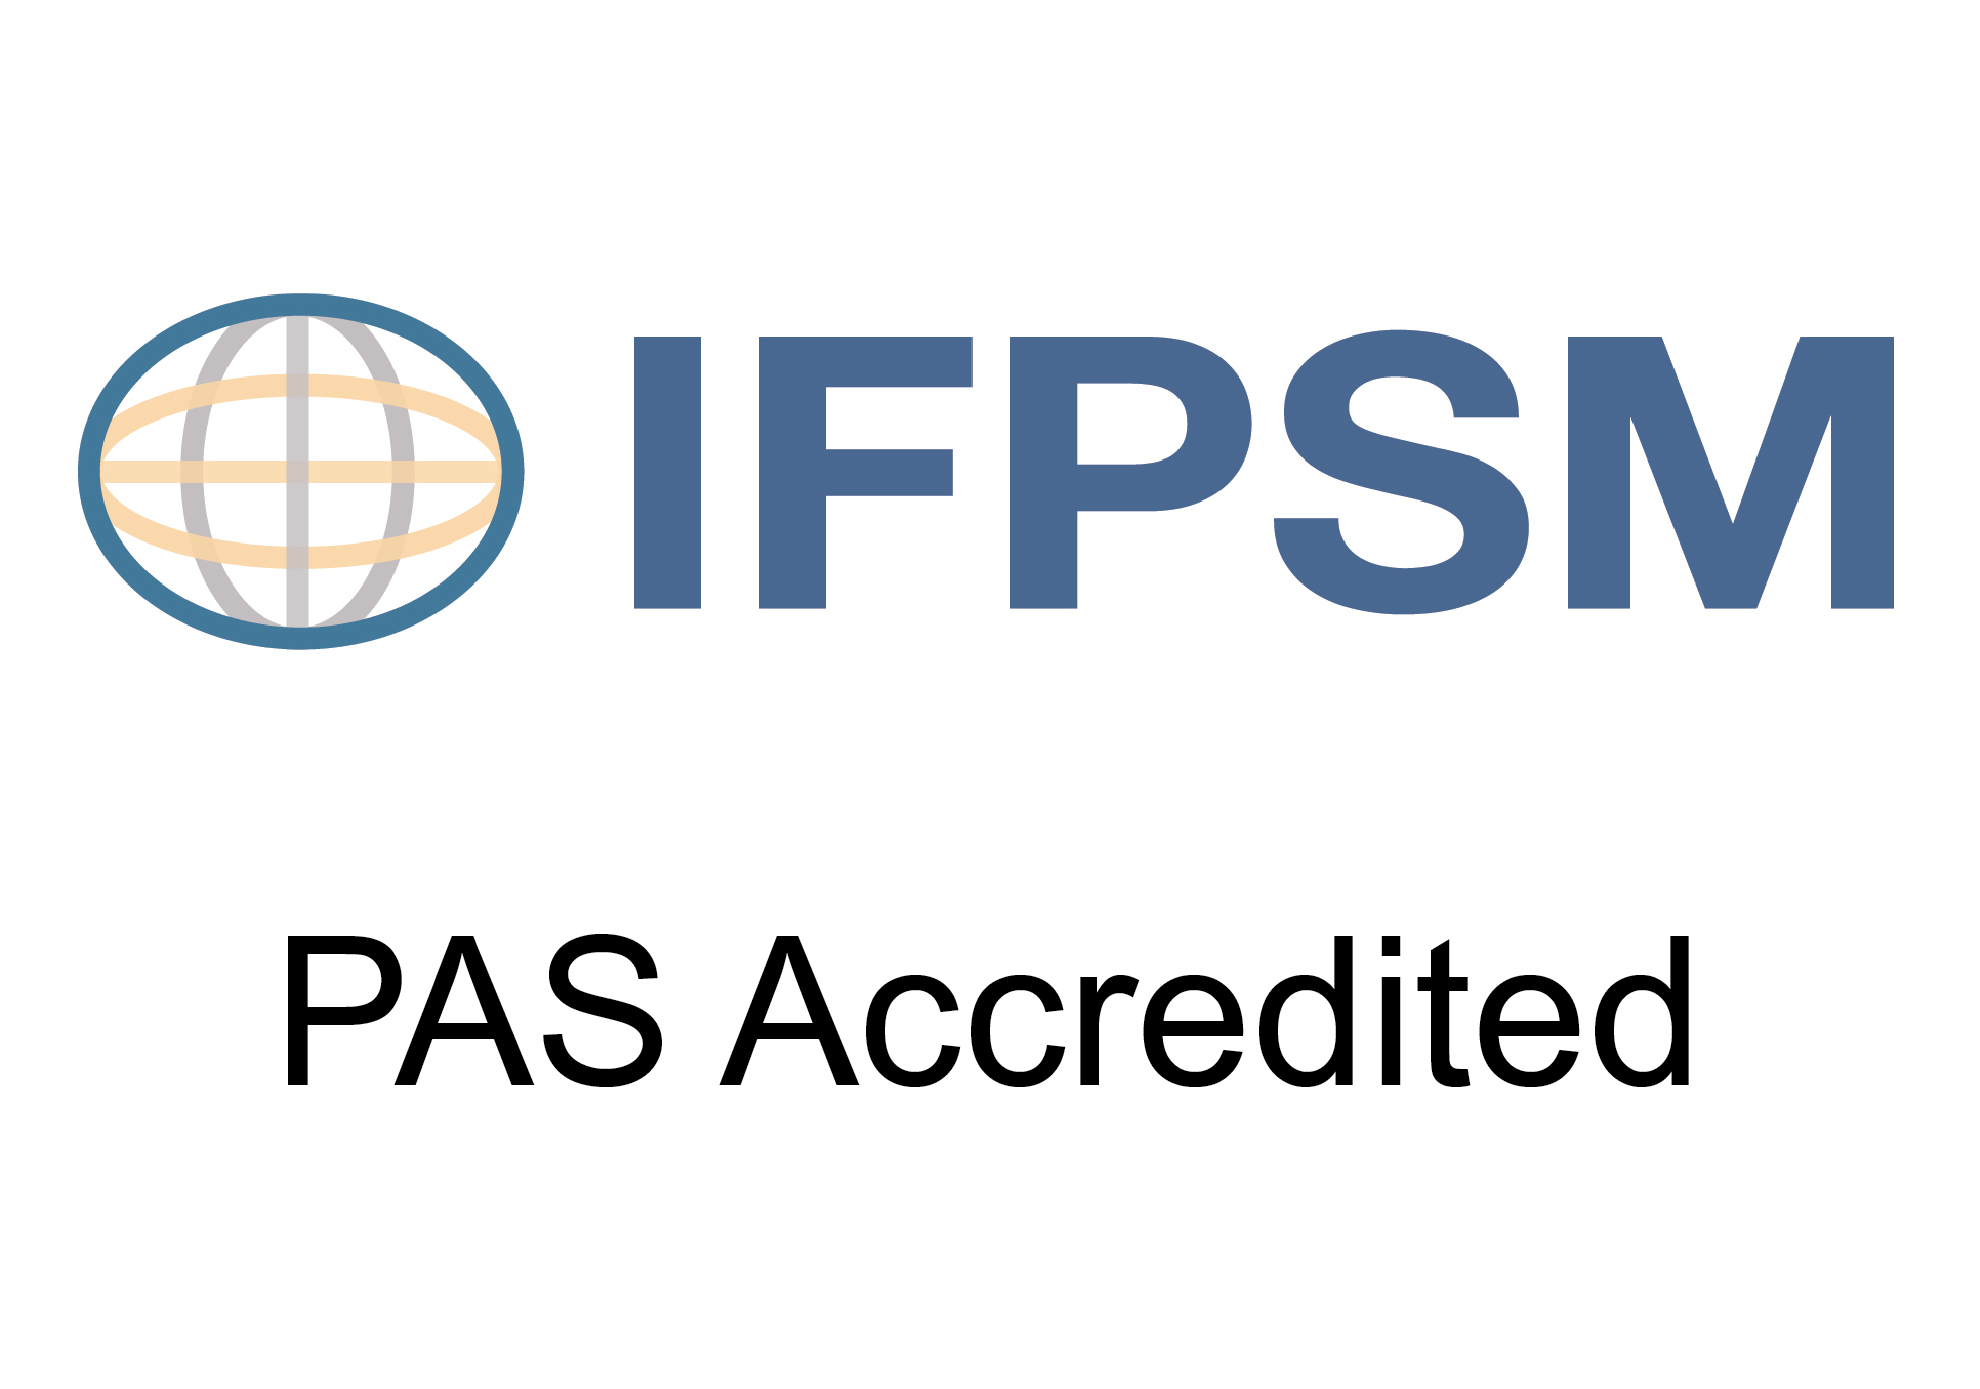 IFPSM-New-logo-with-words-high-resolution-PAS-Accredited-website-2